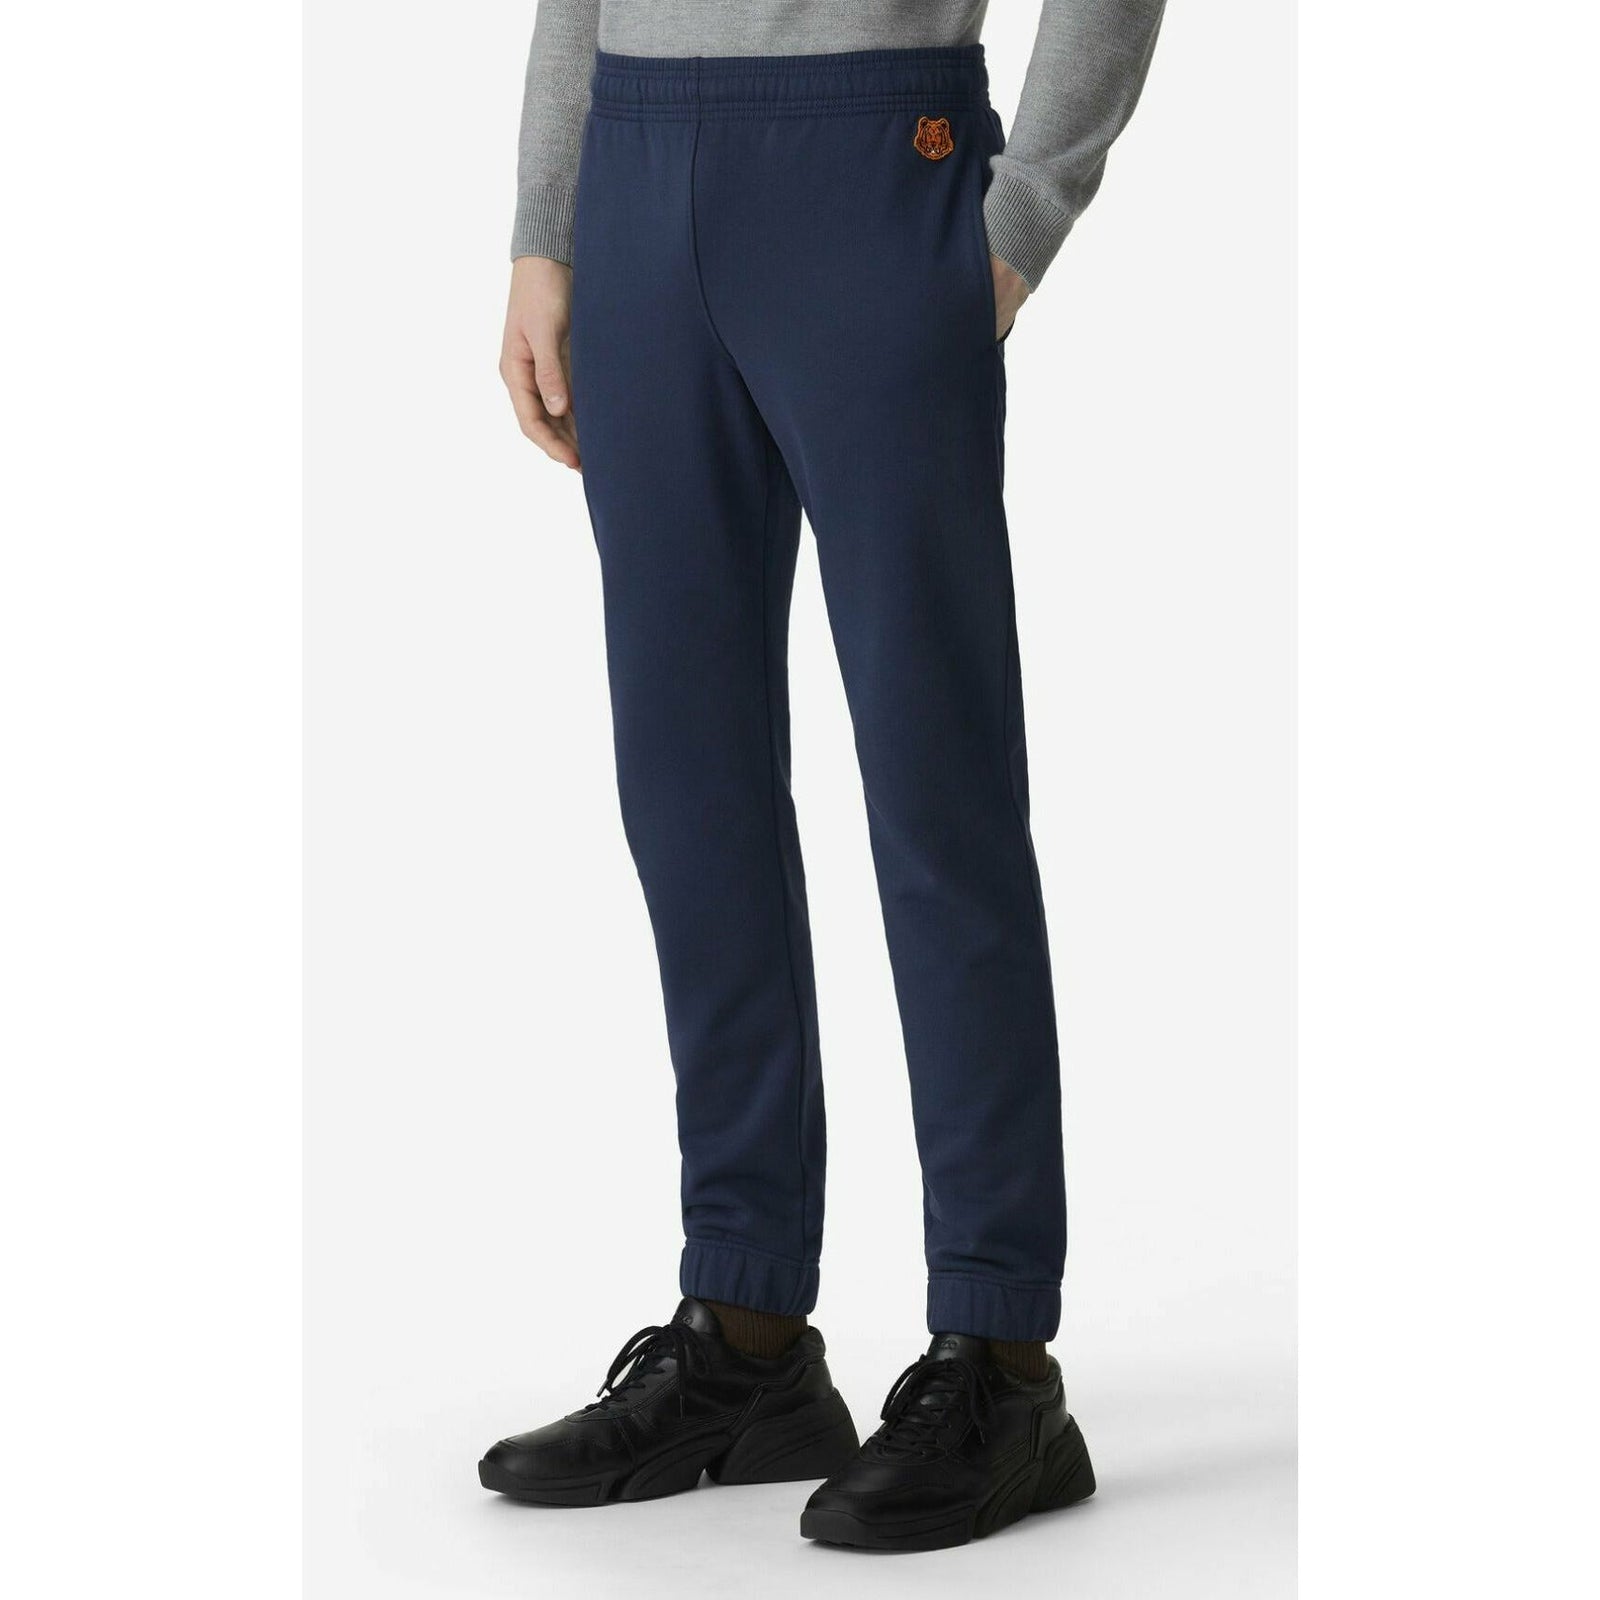 TIGER CREST JOGGING TROUSERS - Yooto